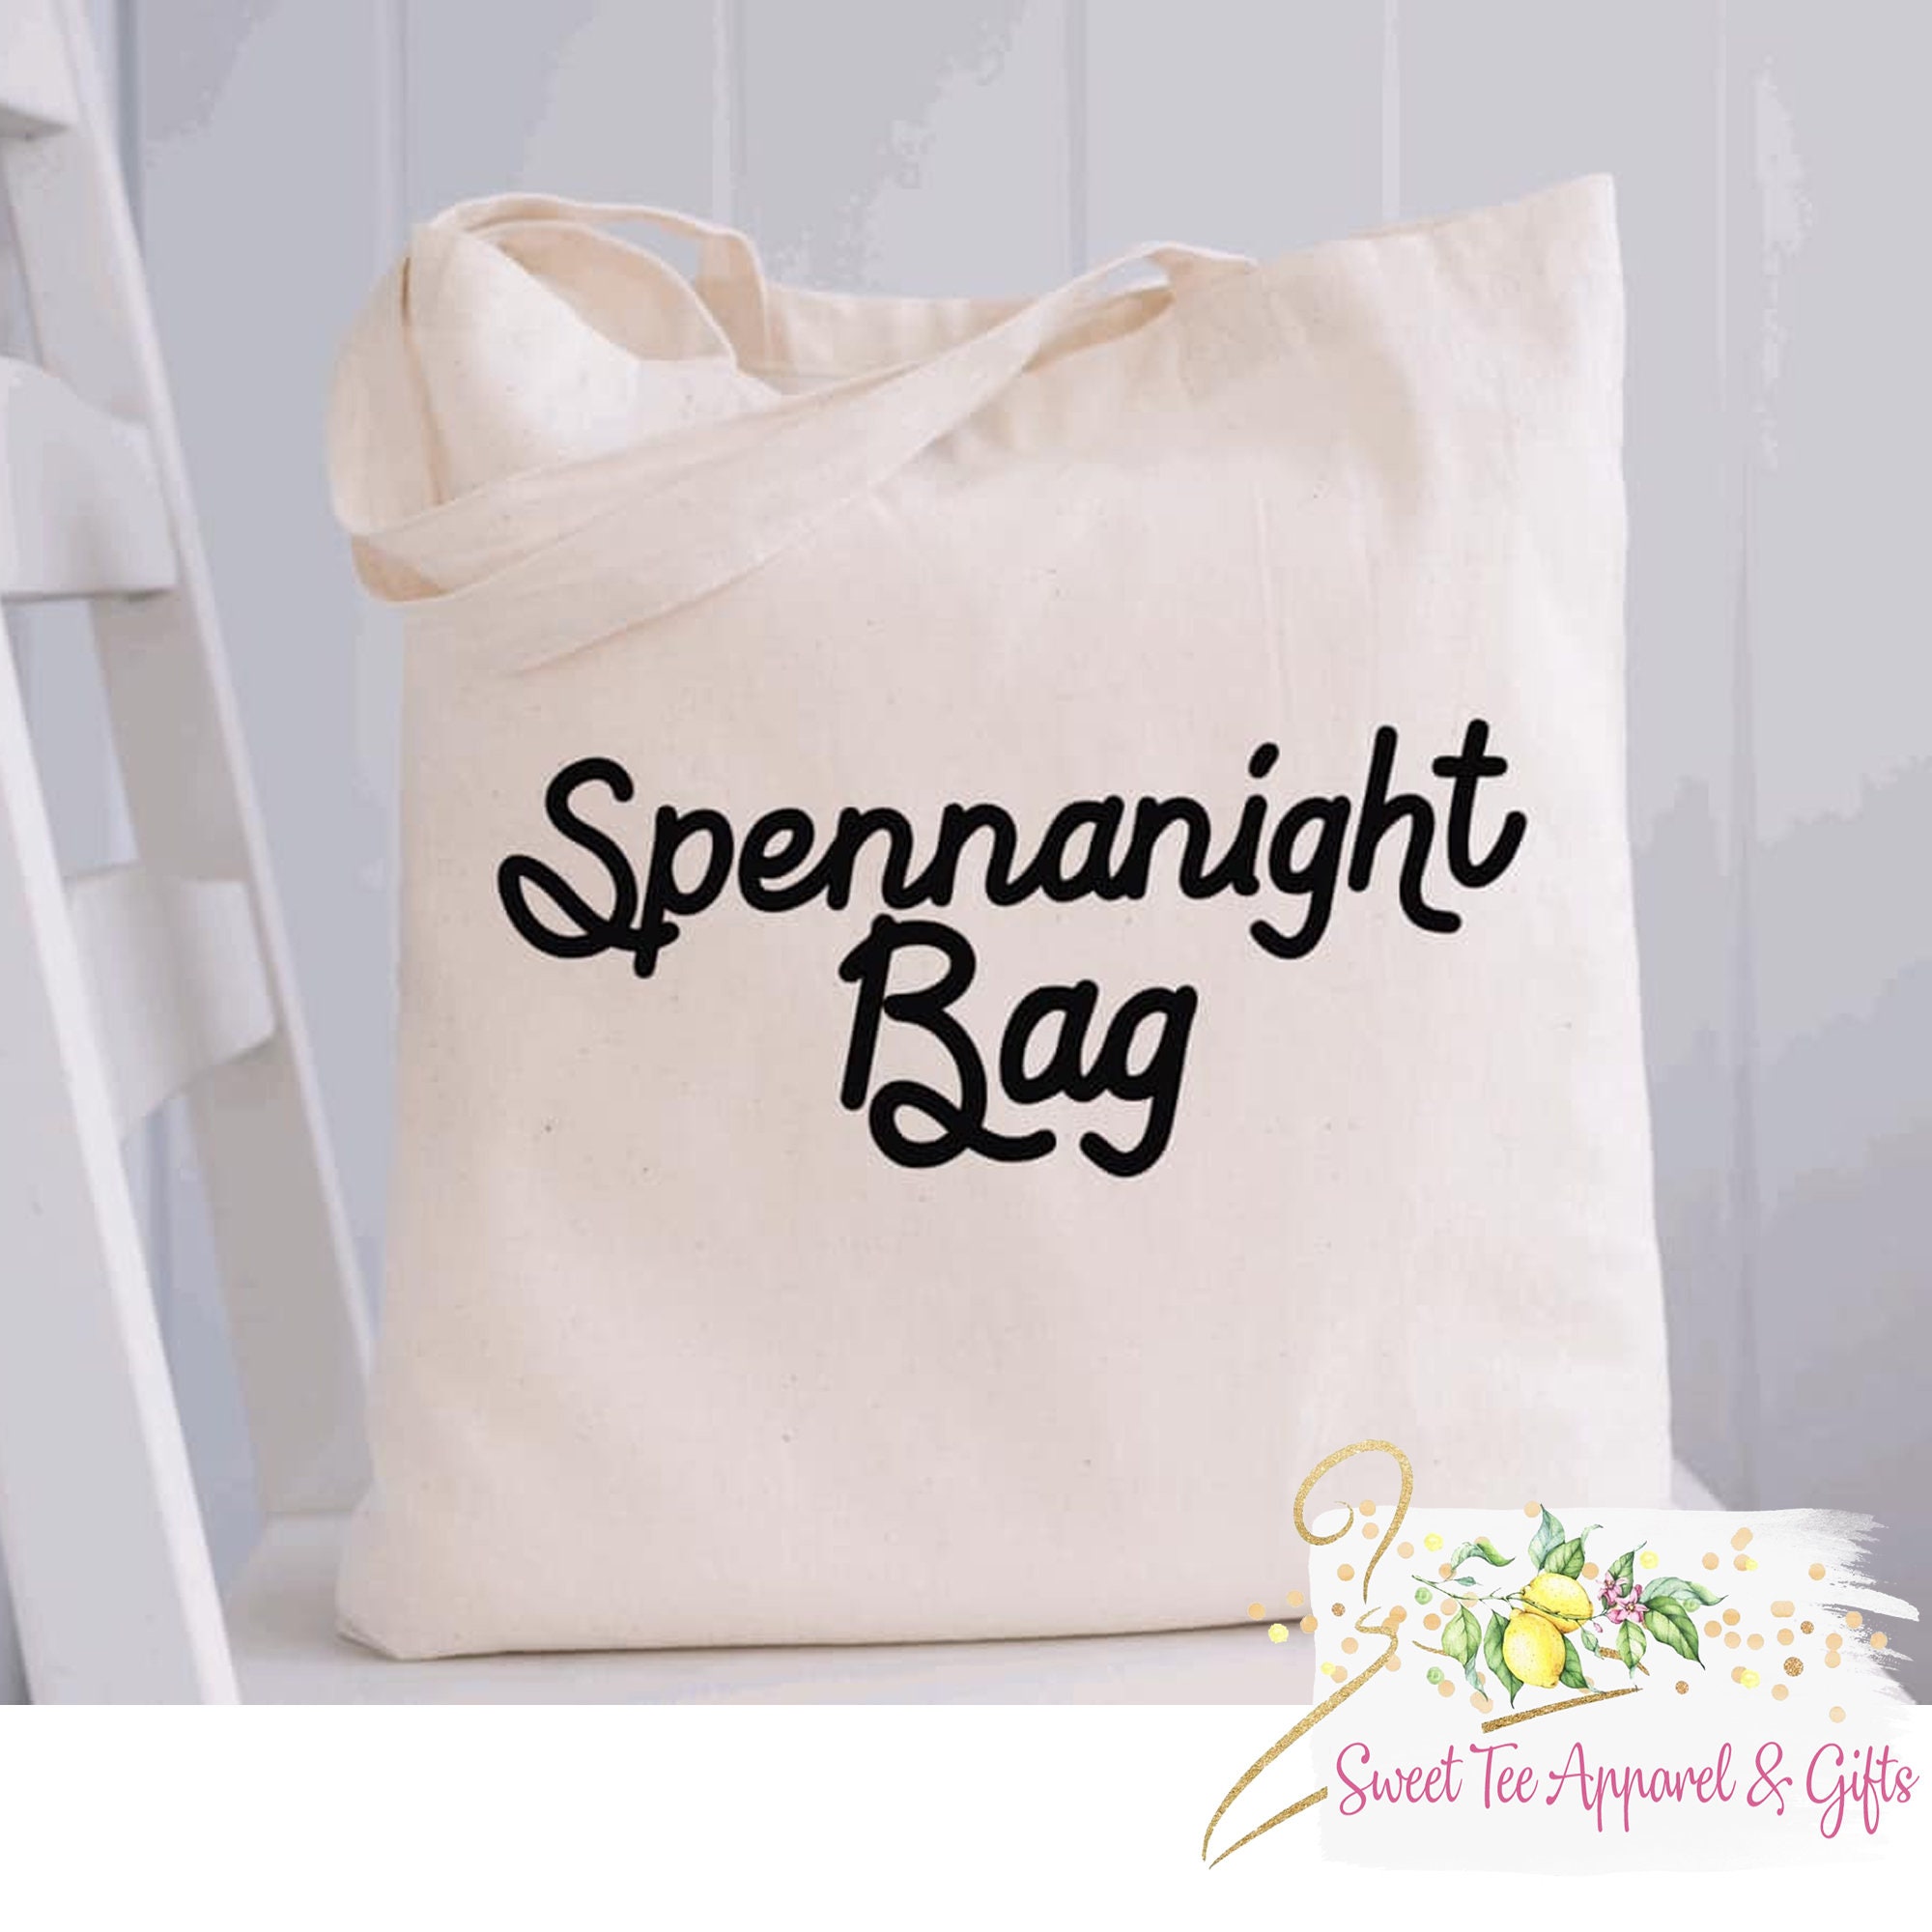 Spinnanight Bag Spend The Night Zipper Pouch for Sale by tinalanette